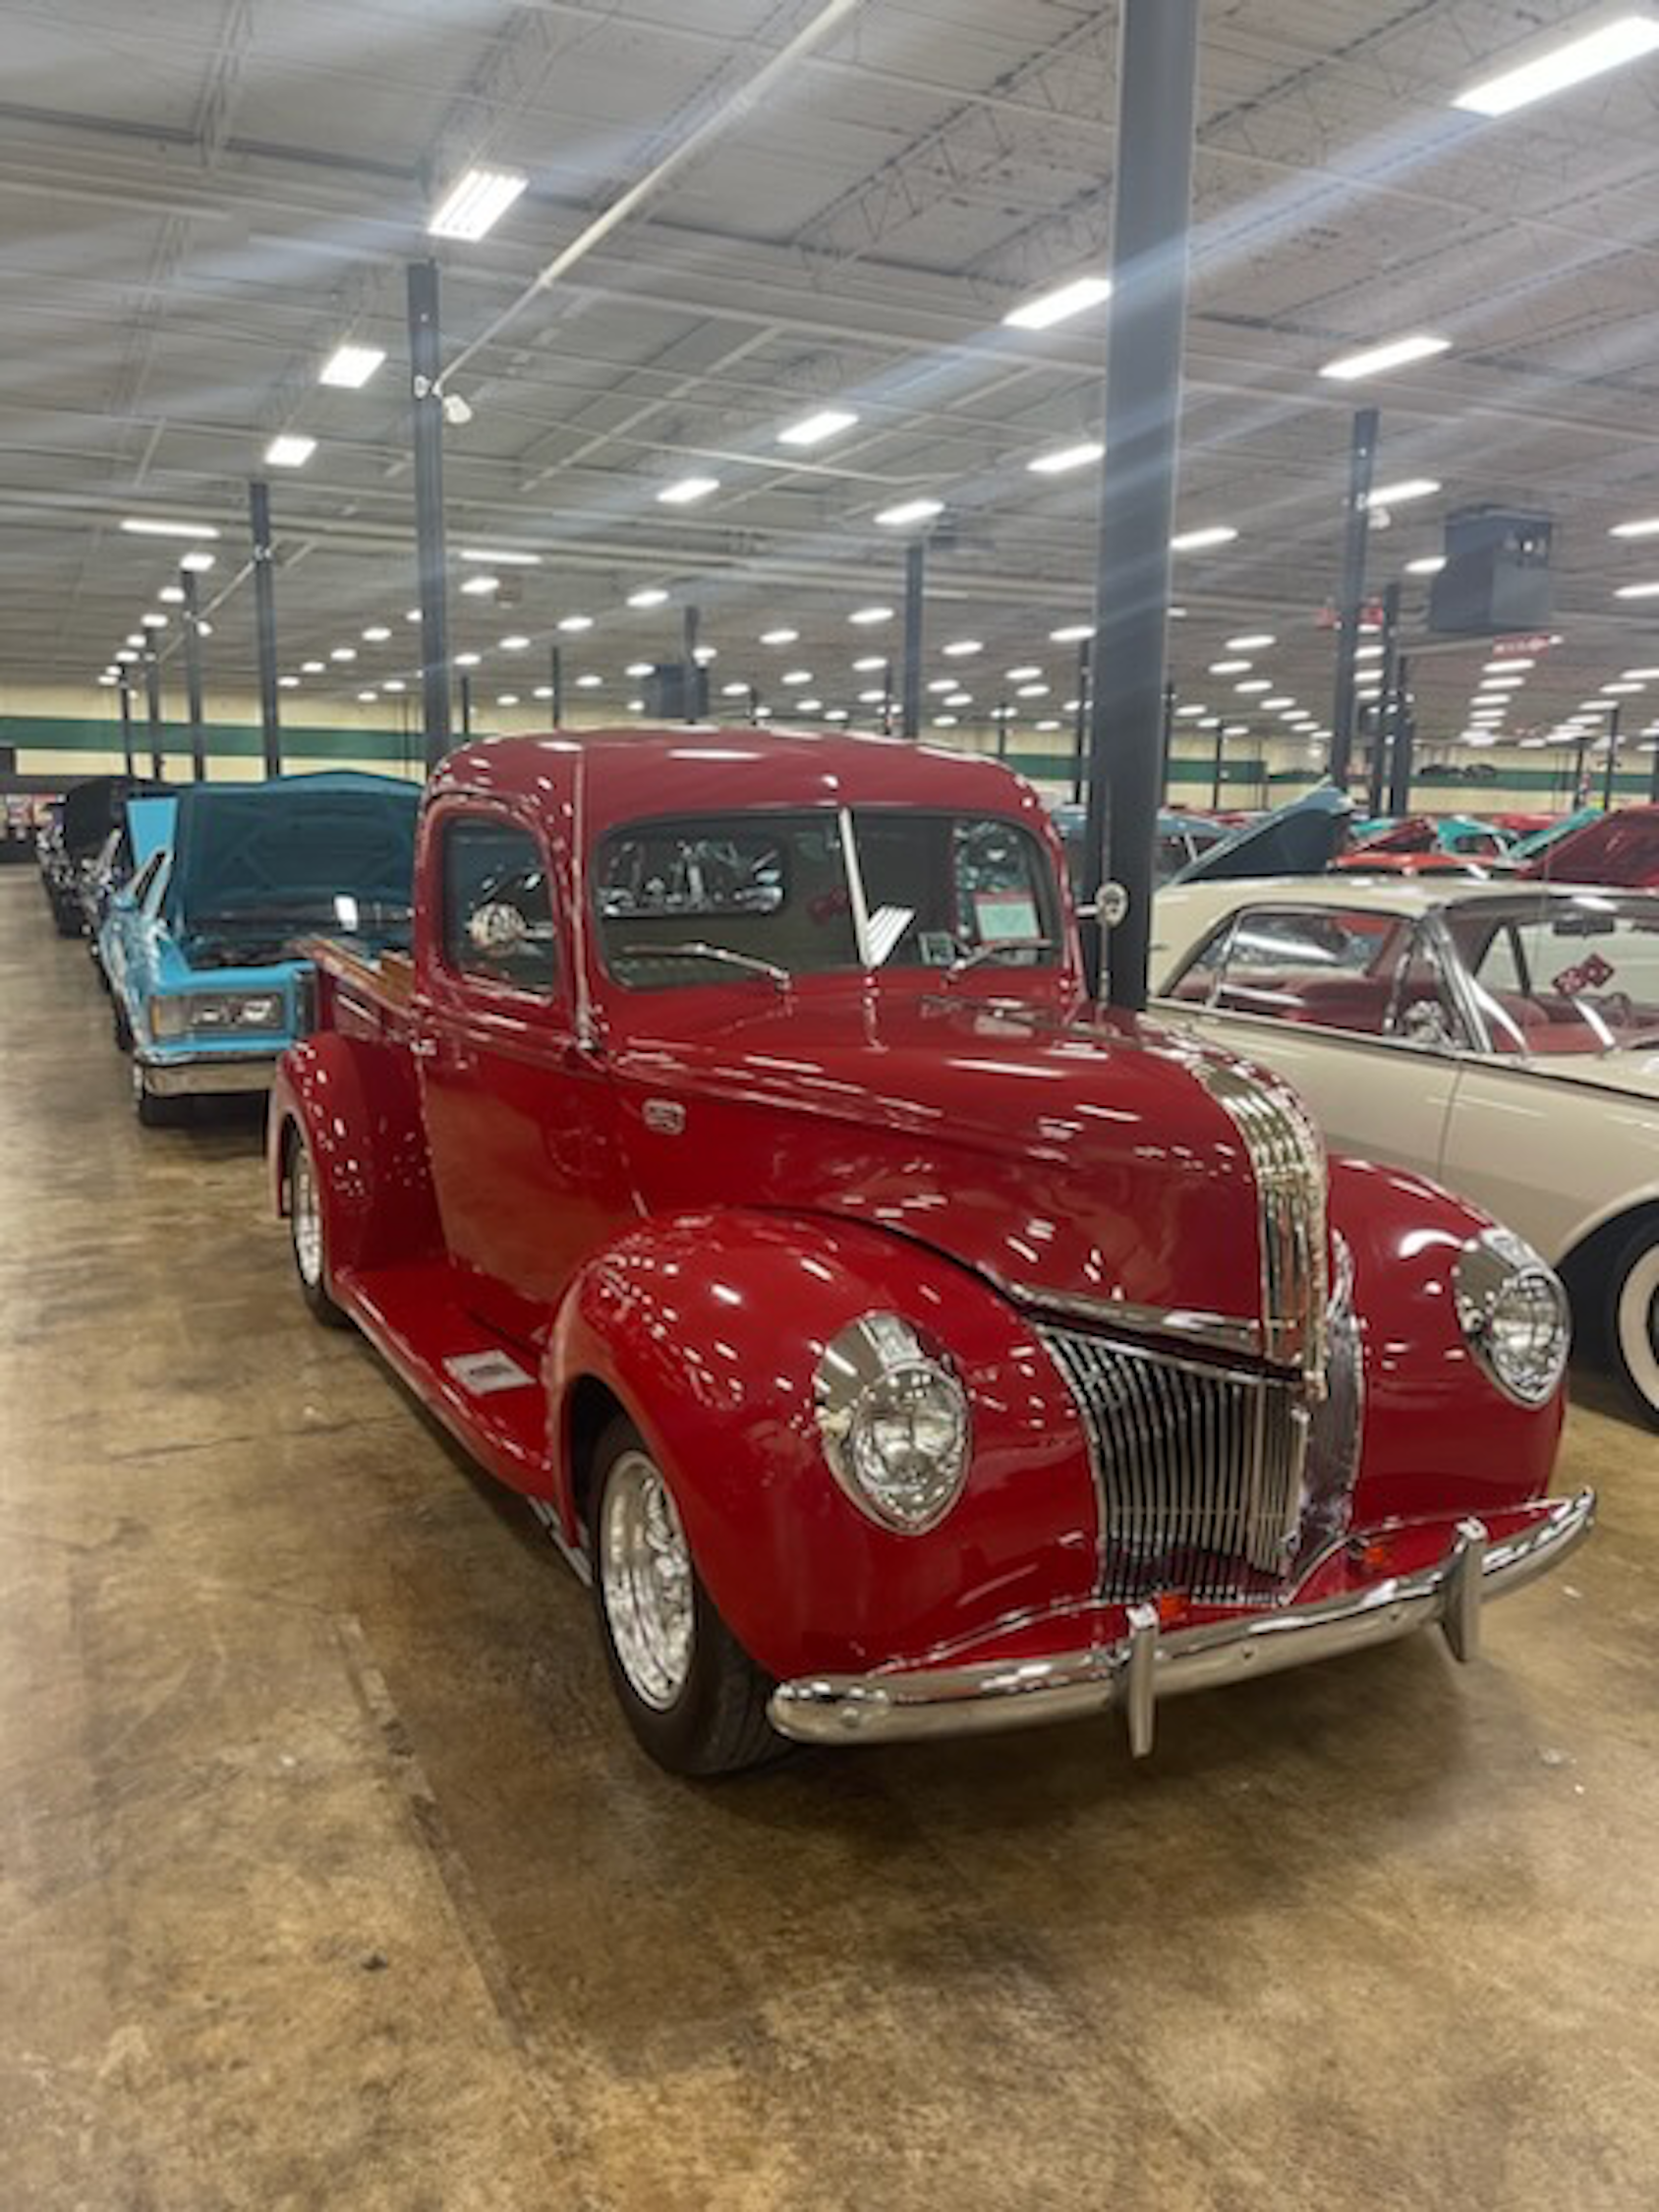 We always have a great time. at the Cabin Fever Antique Car Show at the Knoxville Expo Center